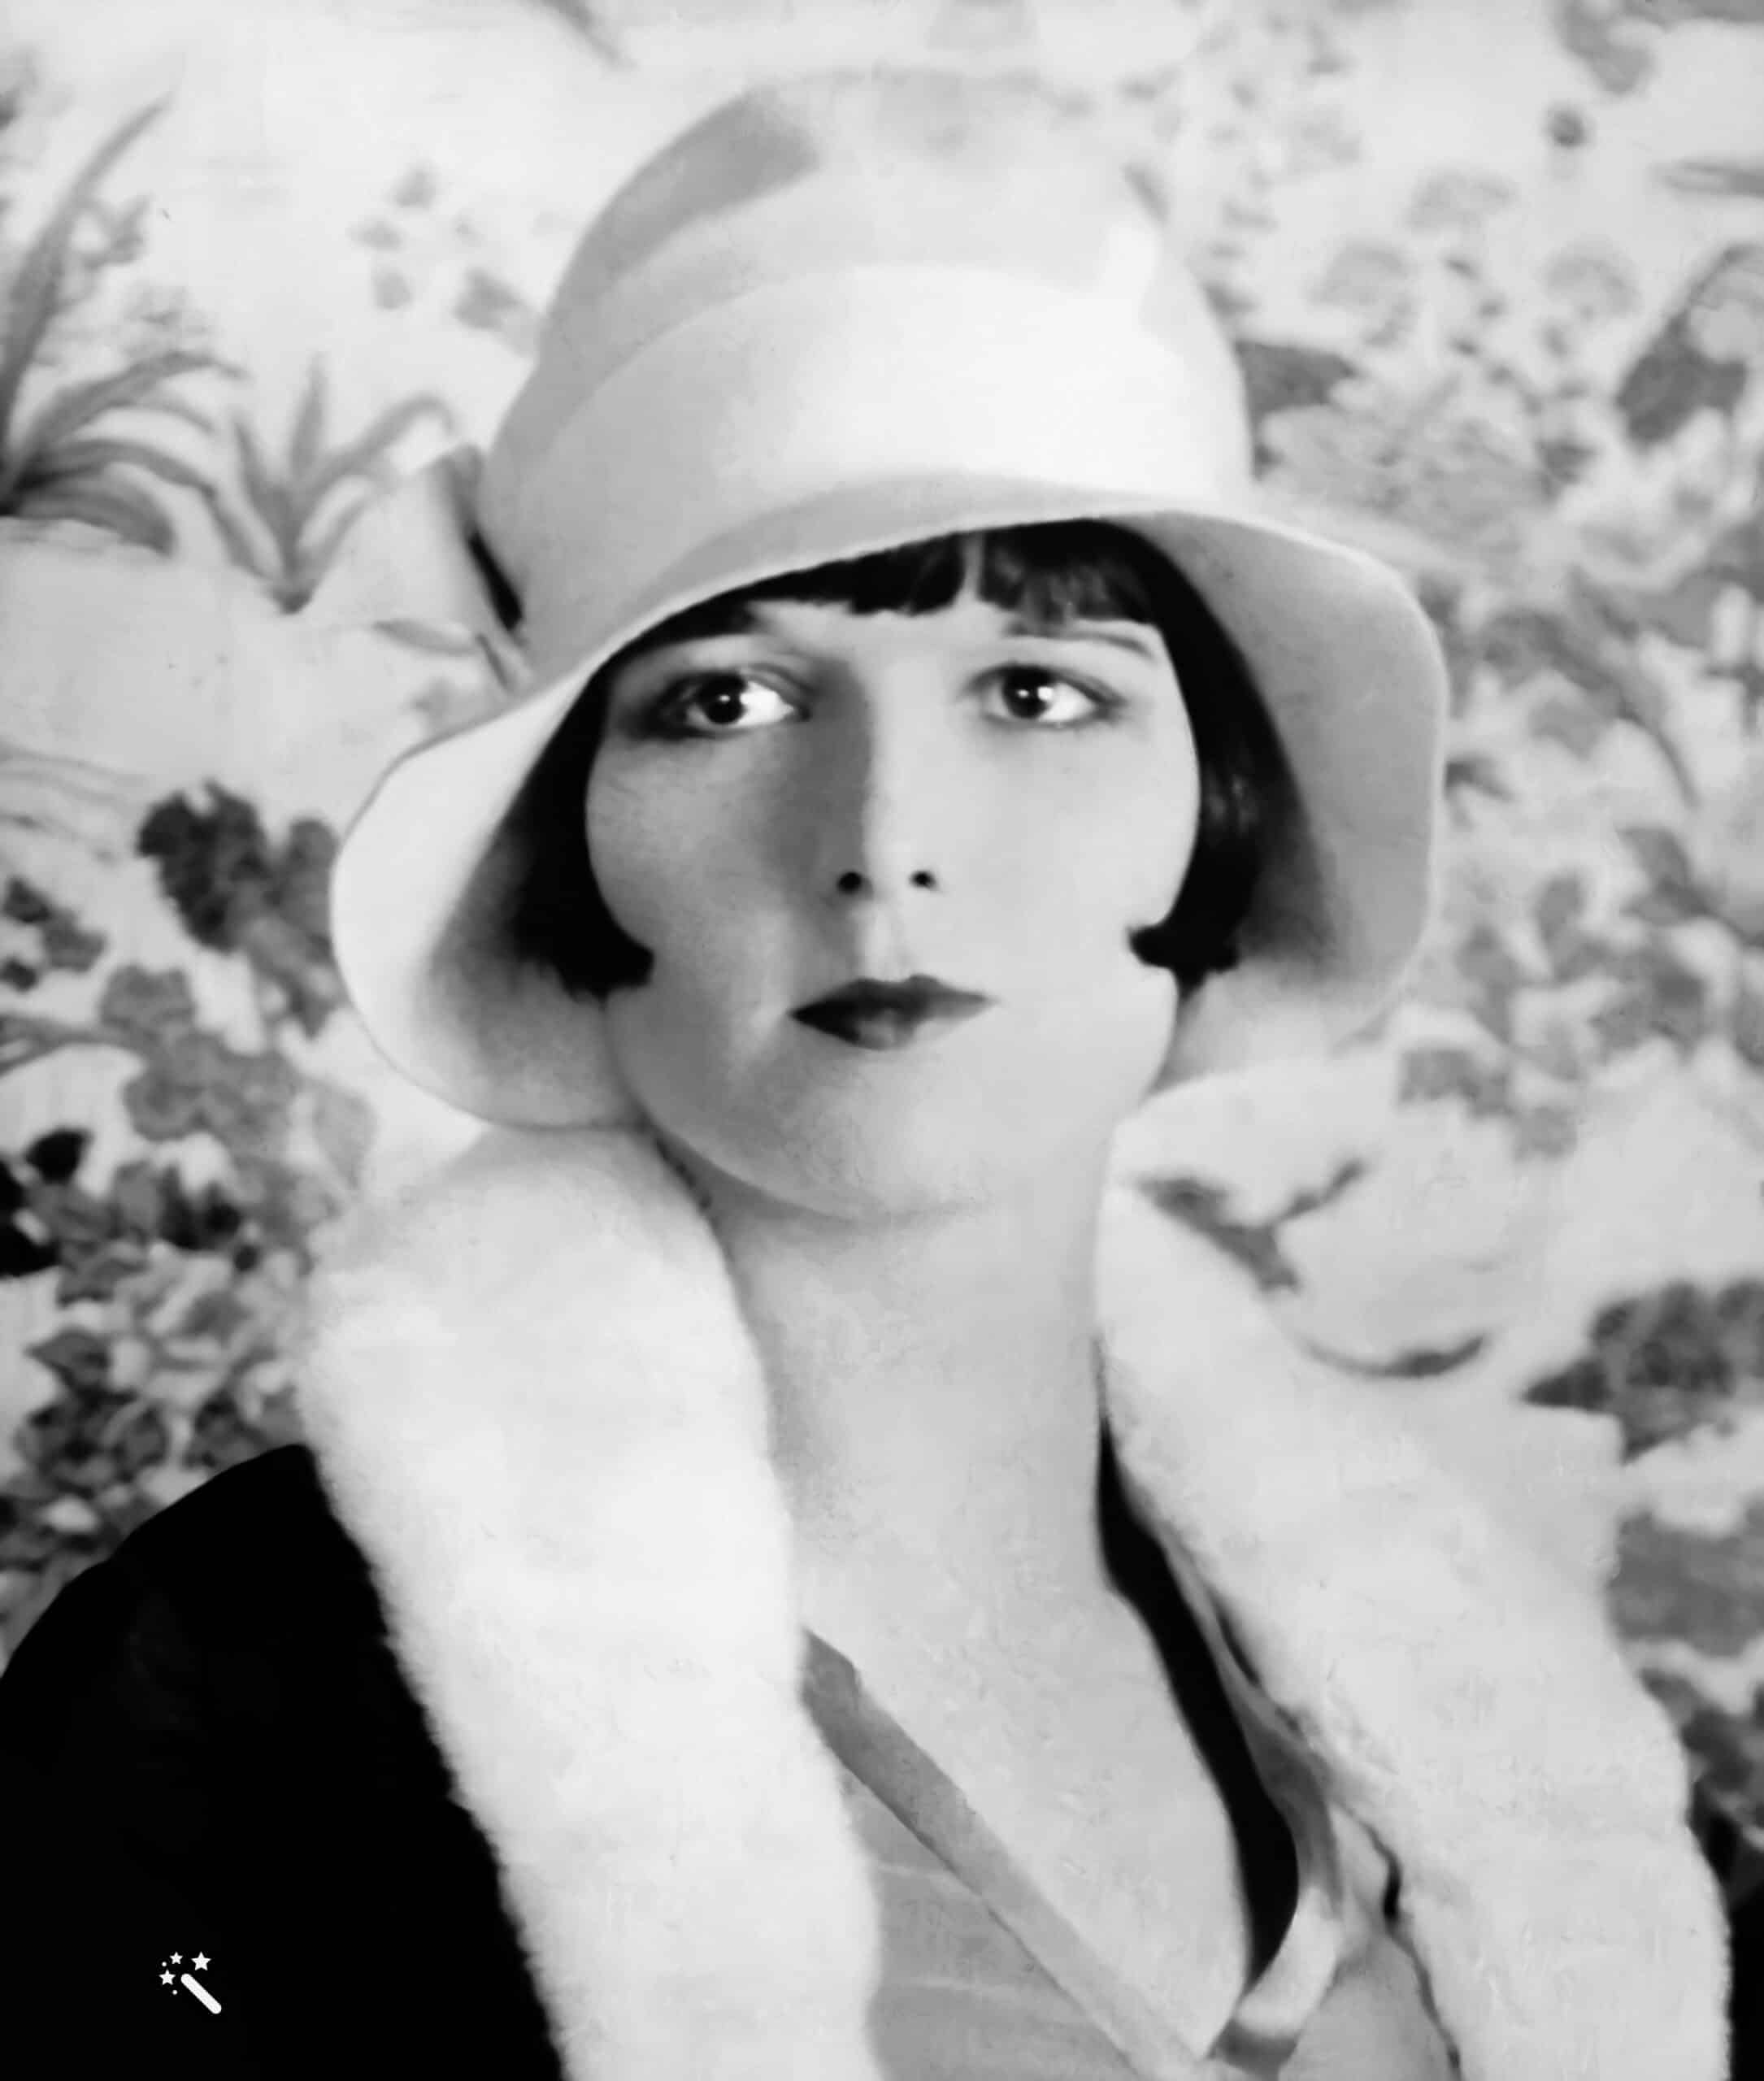 Louise Brooks, an iconic silent film actress known for her bobbed haircut and portrayal of independent, often mischievous characters